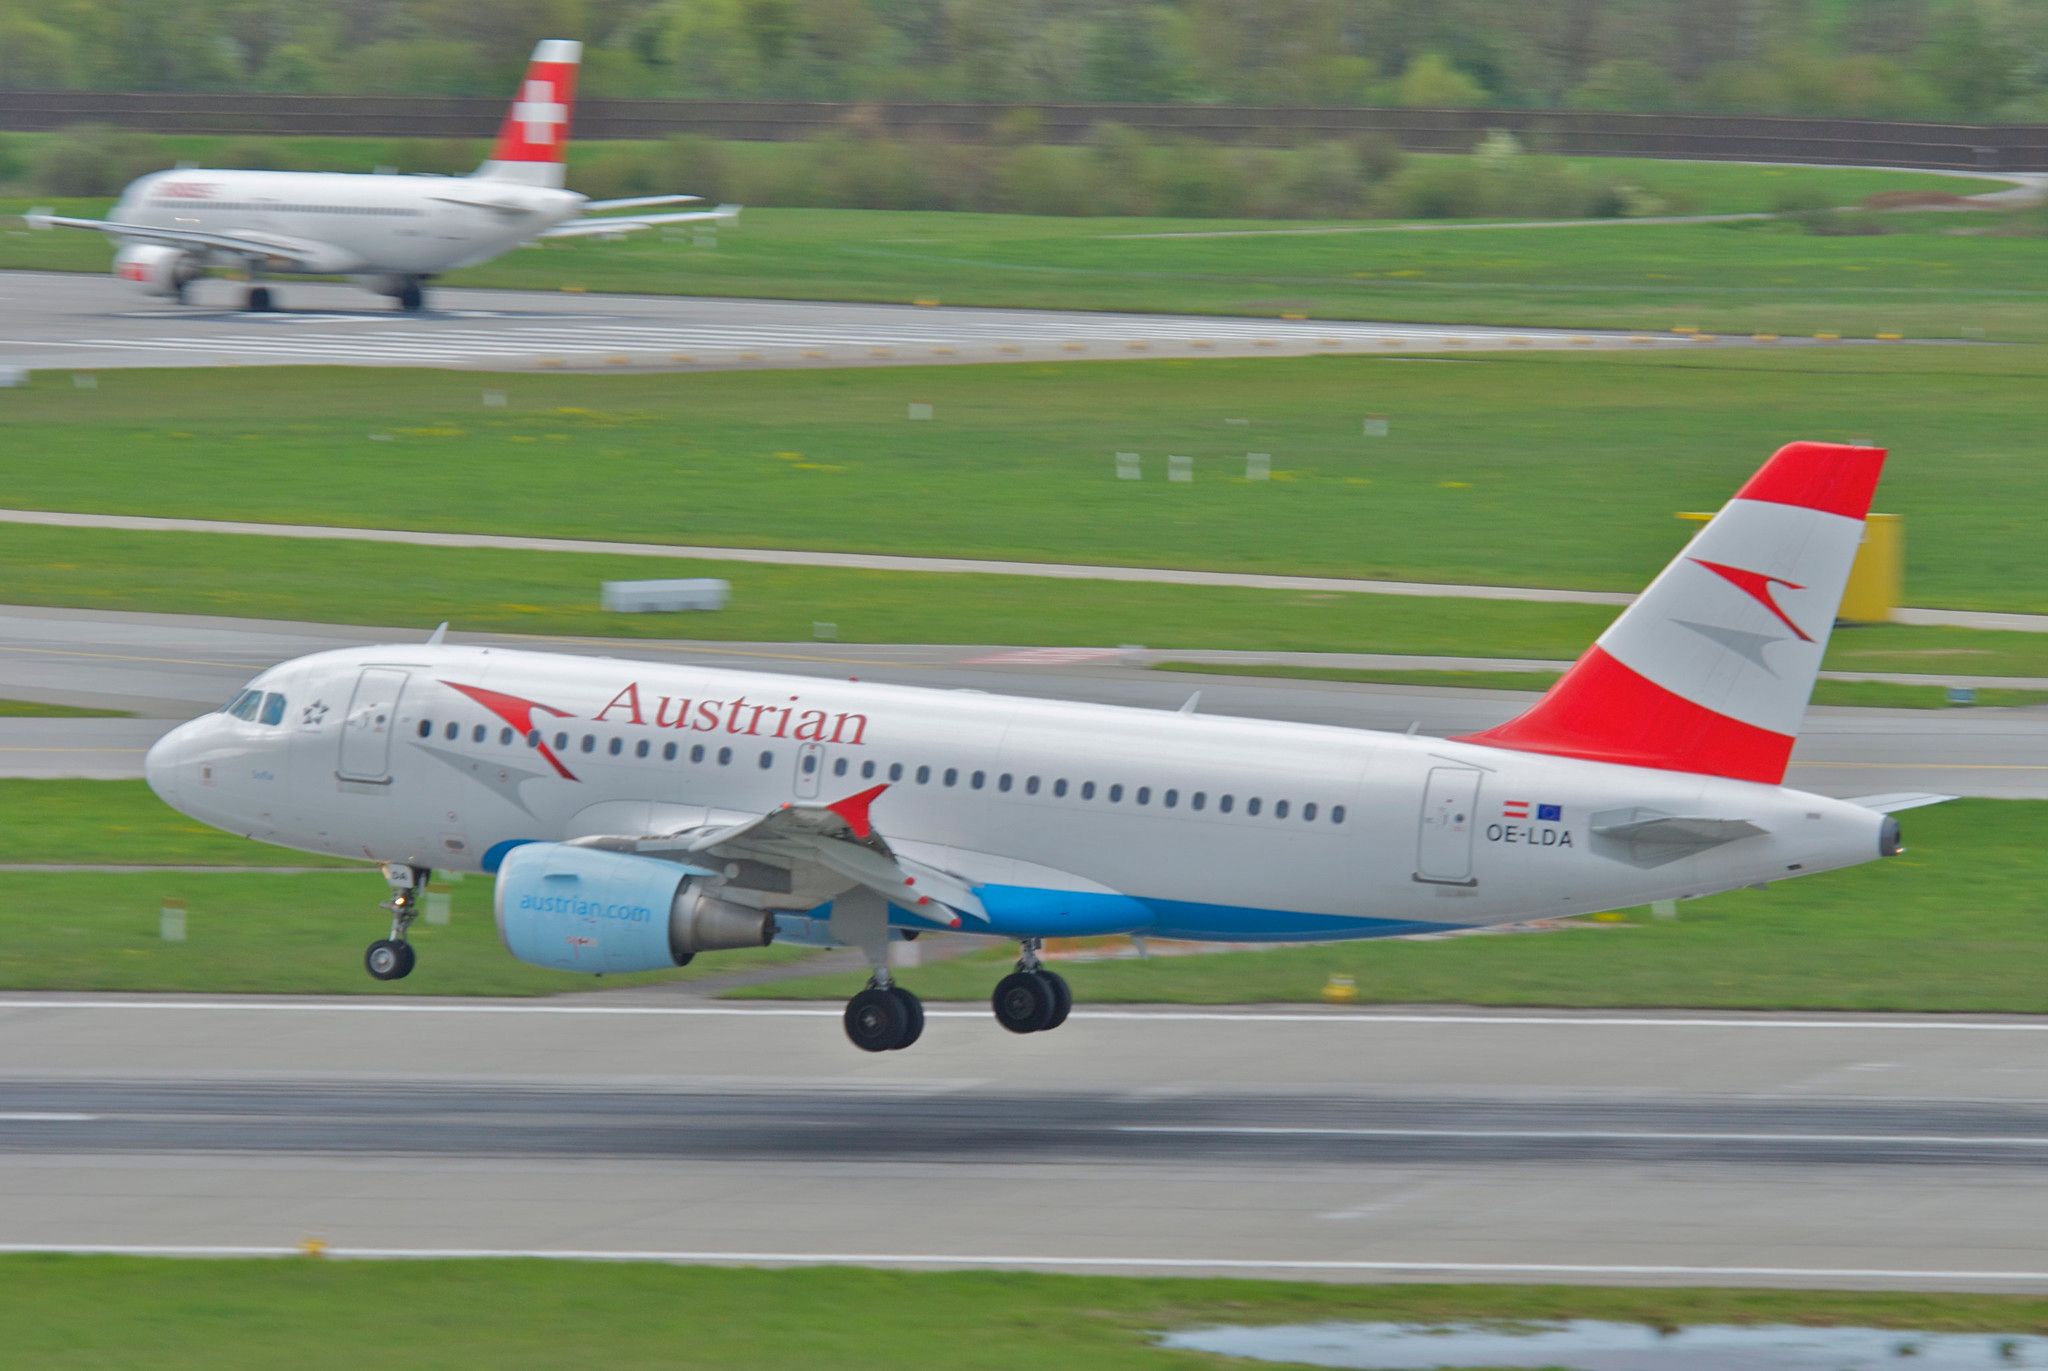 An Austrian Airlines aircraft taking off.